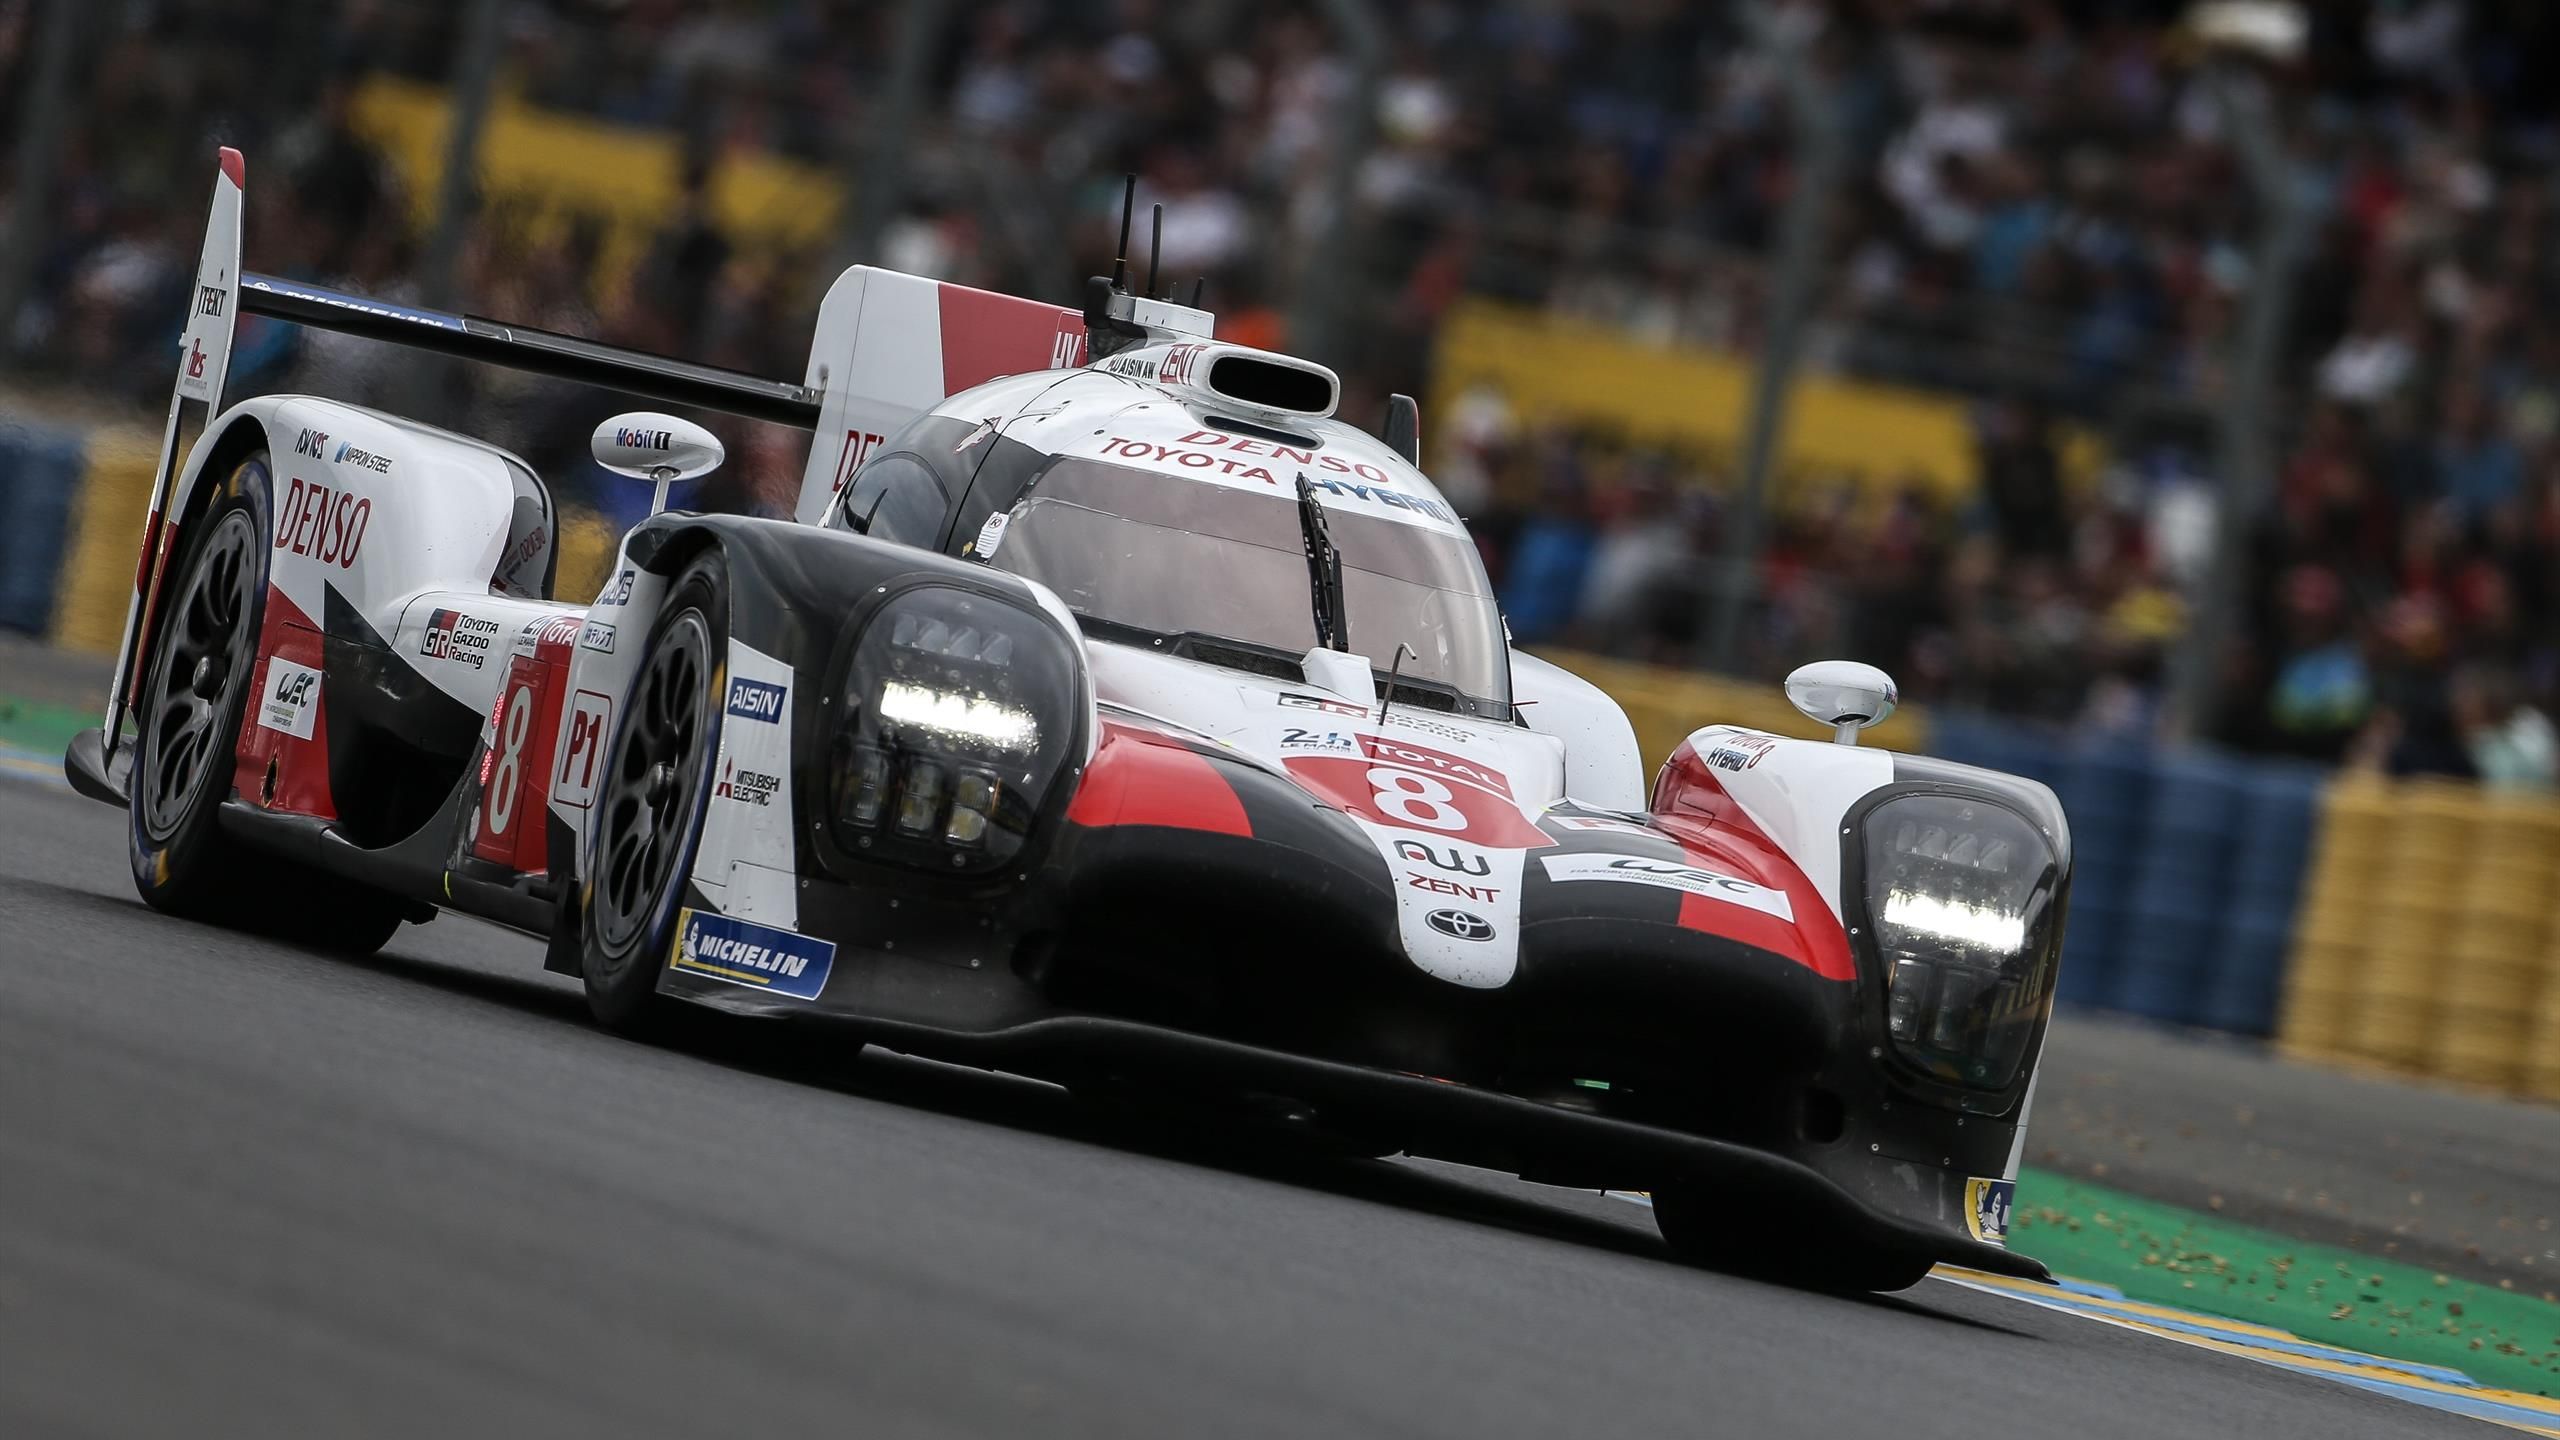 Le Mans 24 Hours: 18 Hours Update